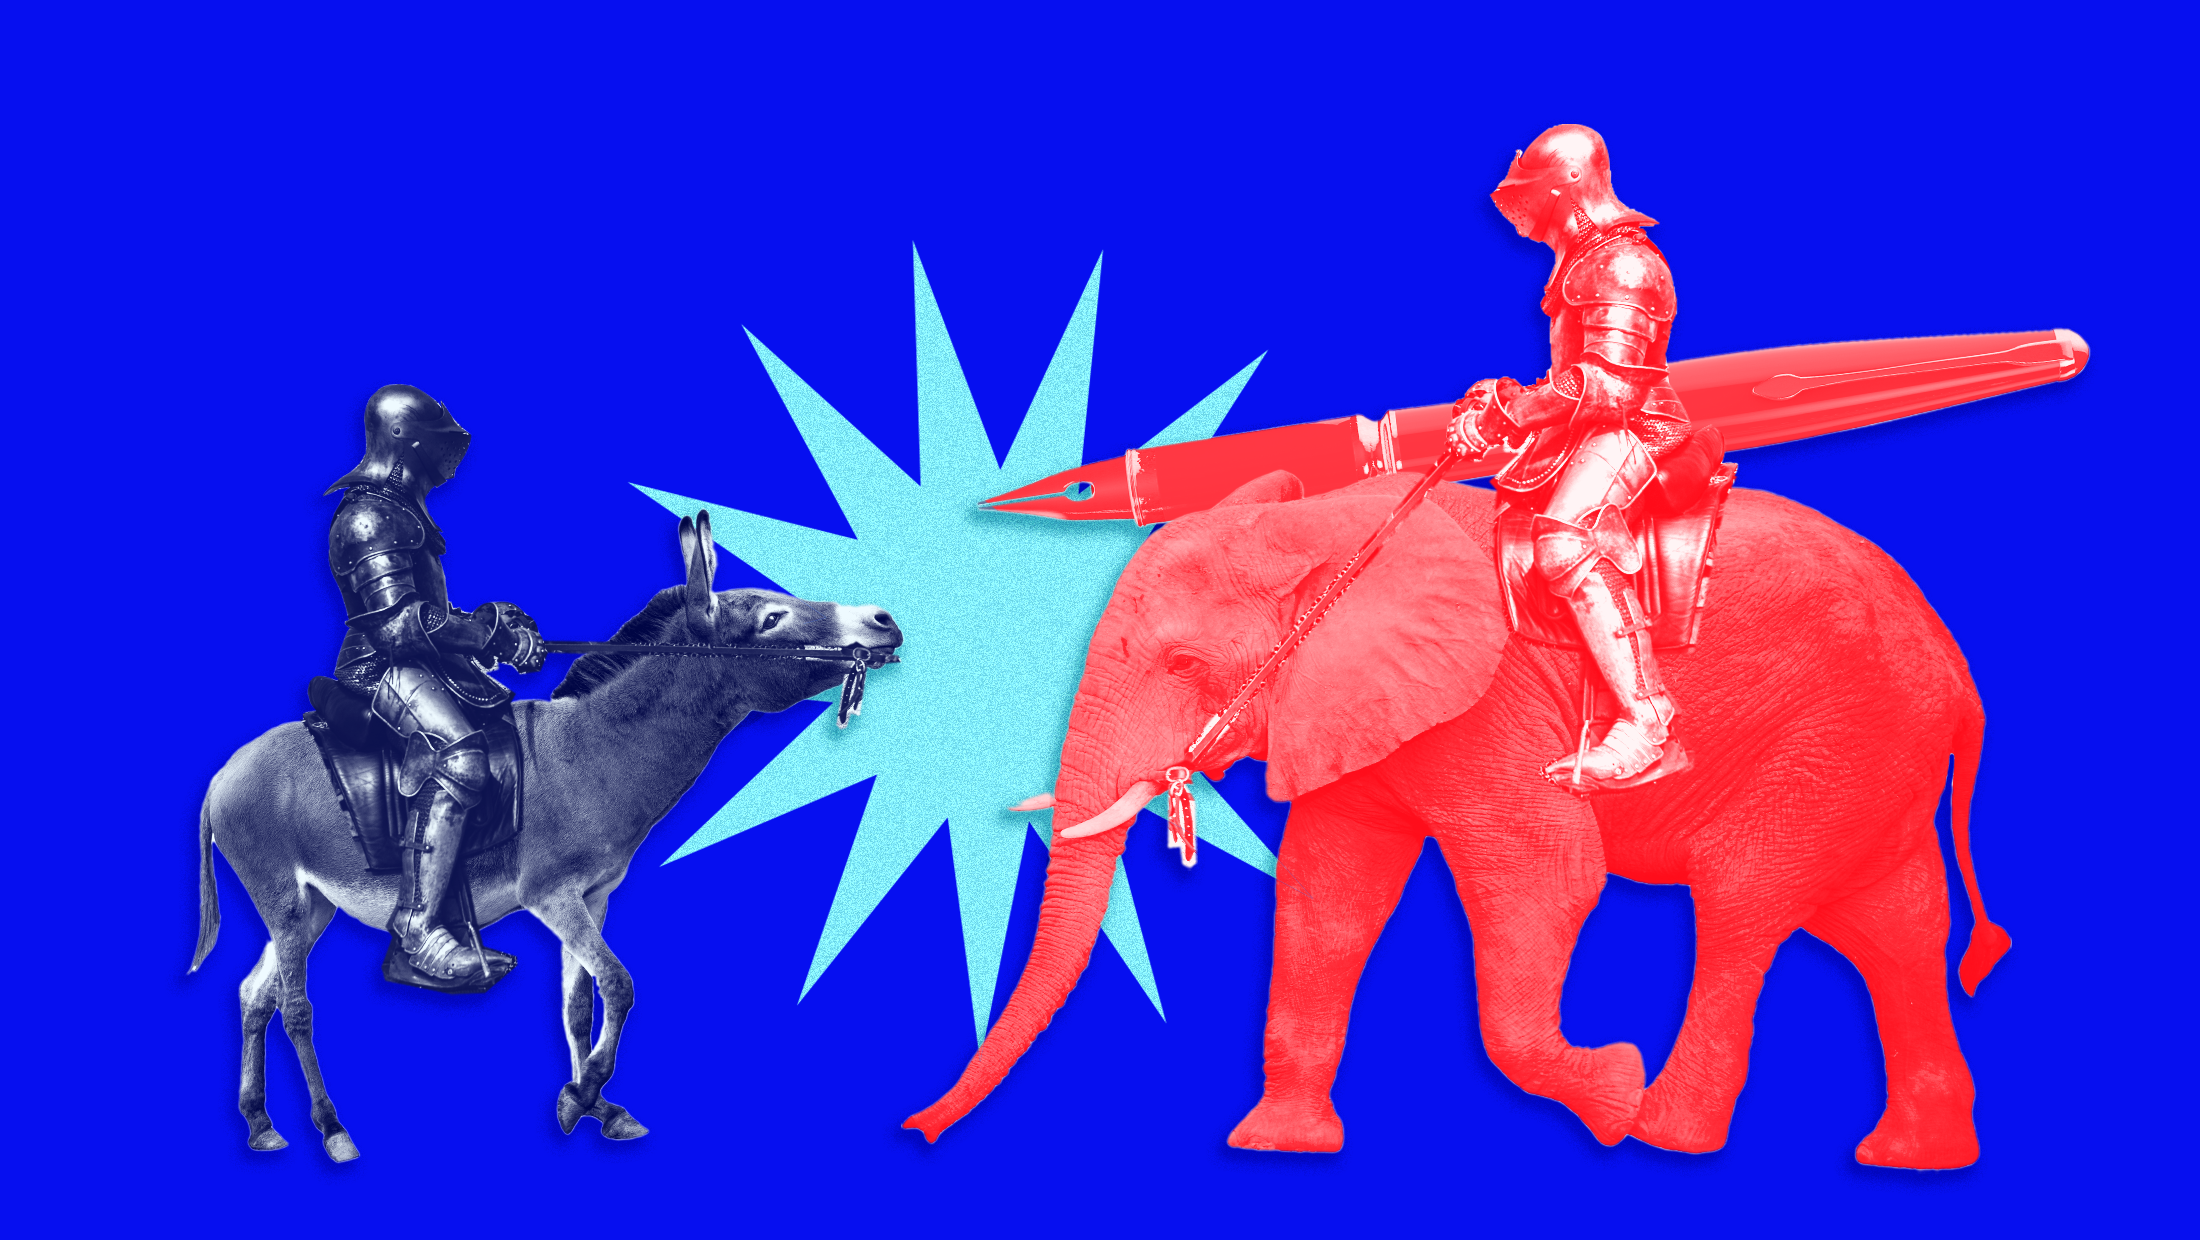 A blue-tinted knight, riding a donkey, dueling against a red-tinted knight, riding a large elephant, who is wielding a large fountain pen